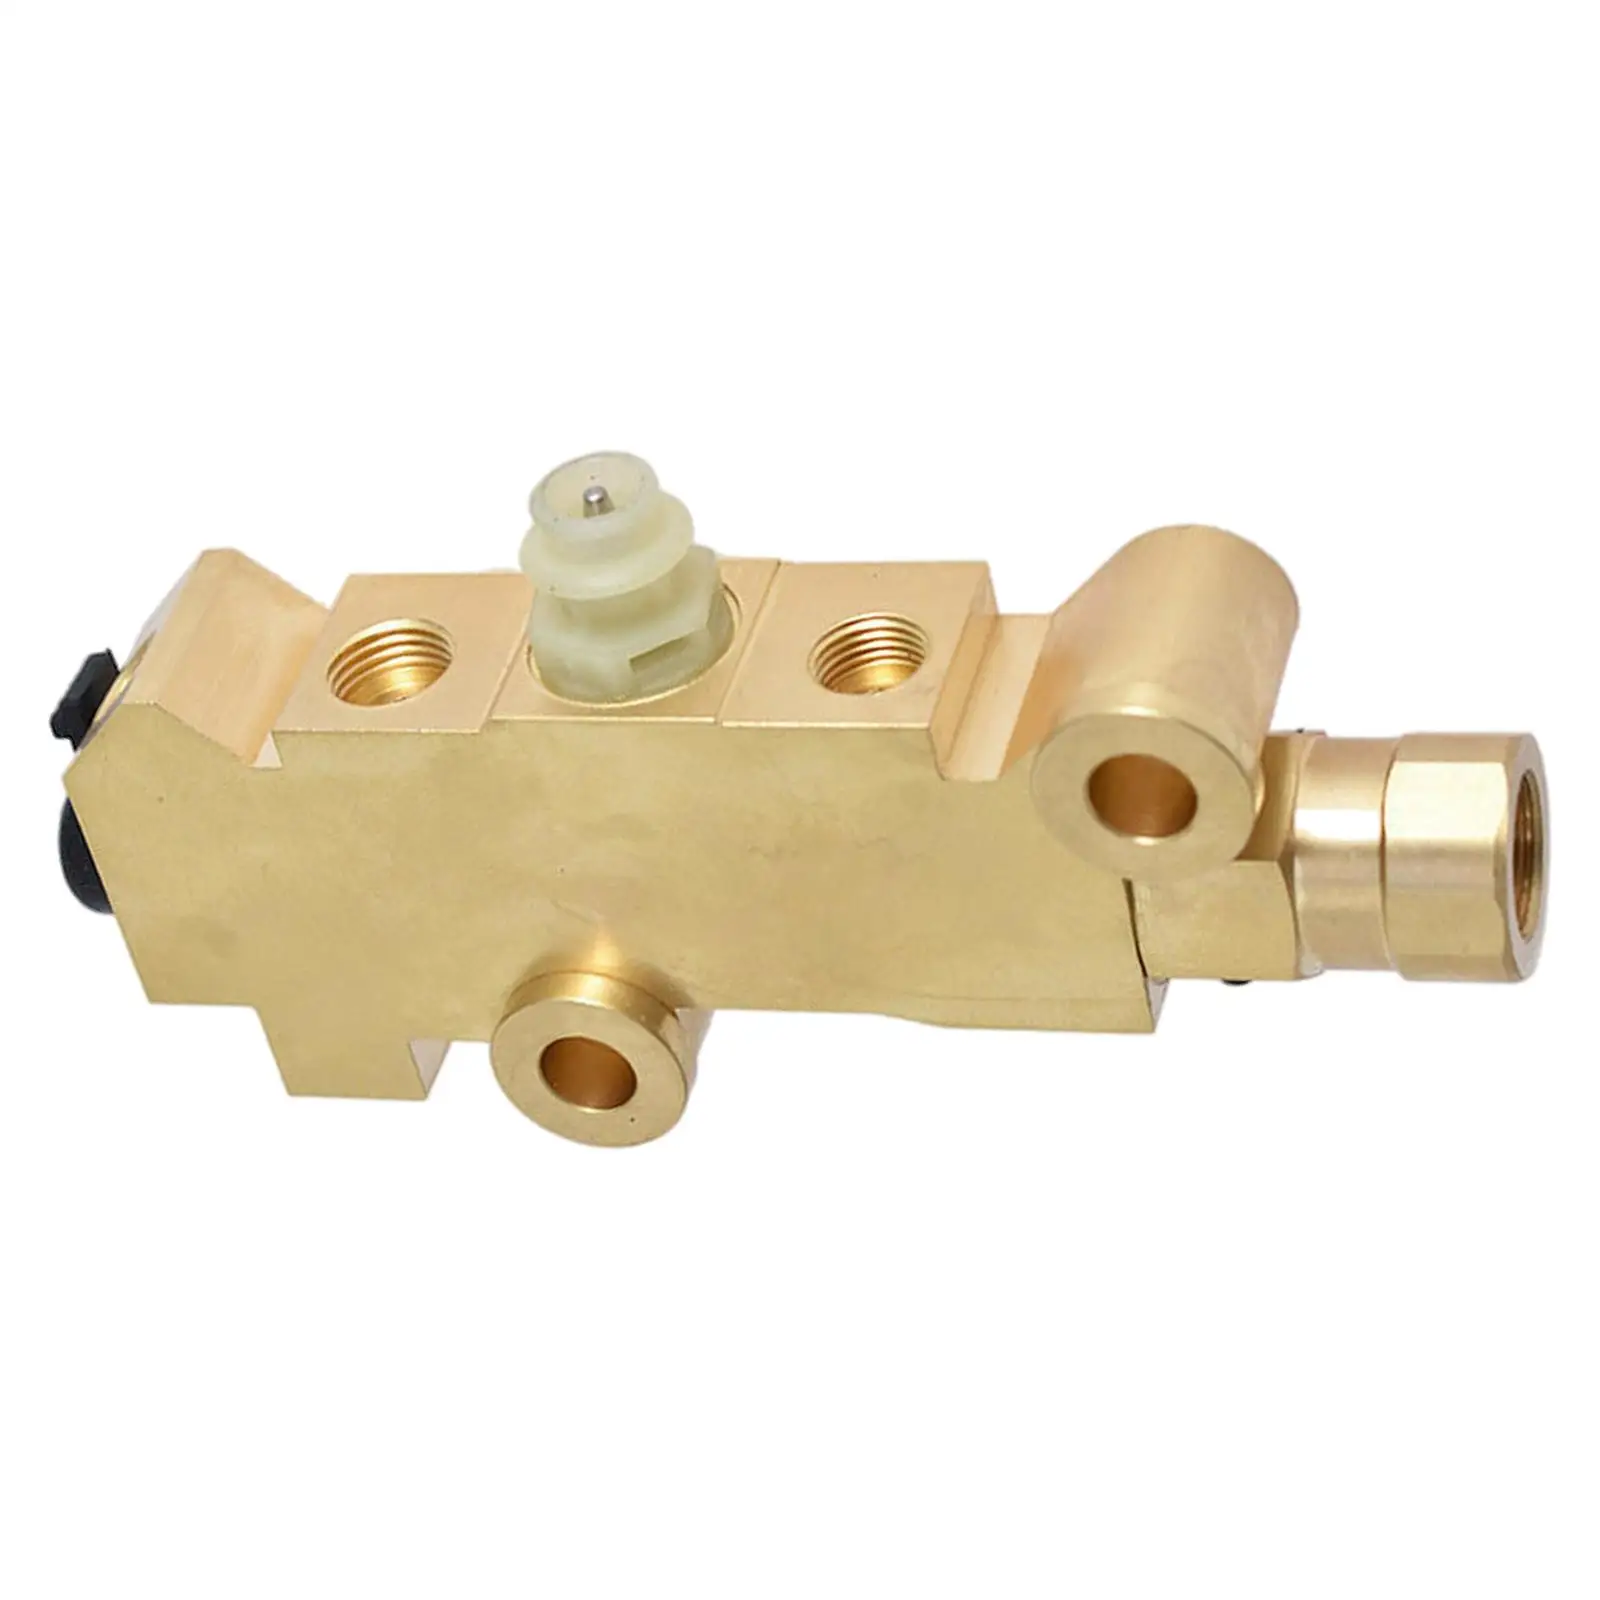 Brake Proportioning Valve Combination Valve 172-135 Drum for  C.7L 350Cu. in. V8 Gas 1986 Replacement